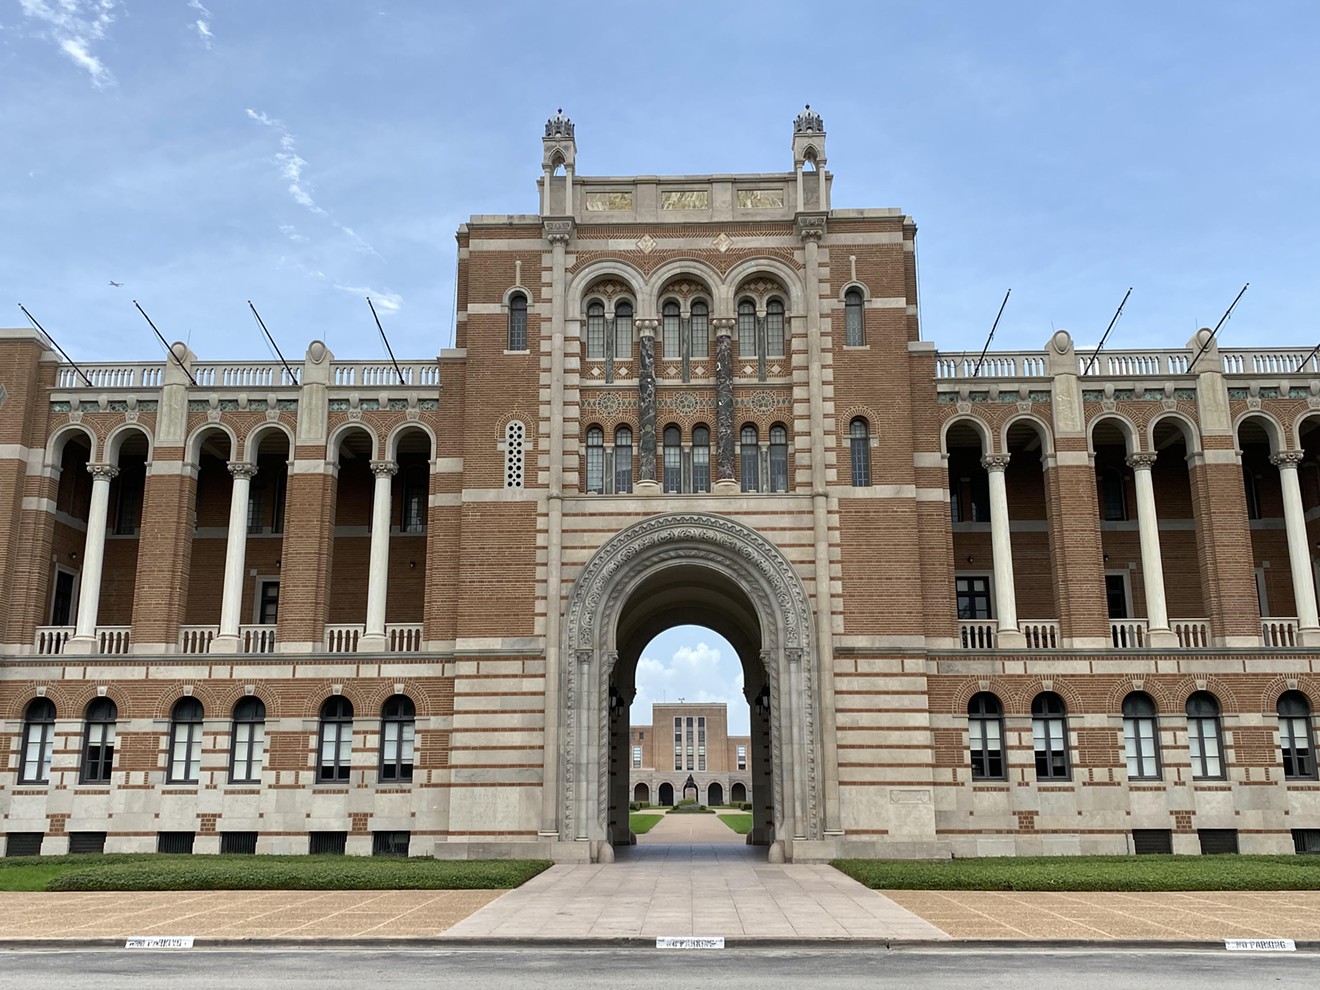 Houston's Rice University is trying to figure out how their student body will be affected by U.S. Immigration and Customs Enforcement 's Monday announcement that international students attending universities that have shifted to all-online classes for the fall risk deportation if they don't leave the country.